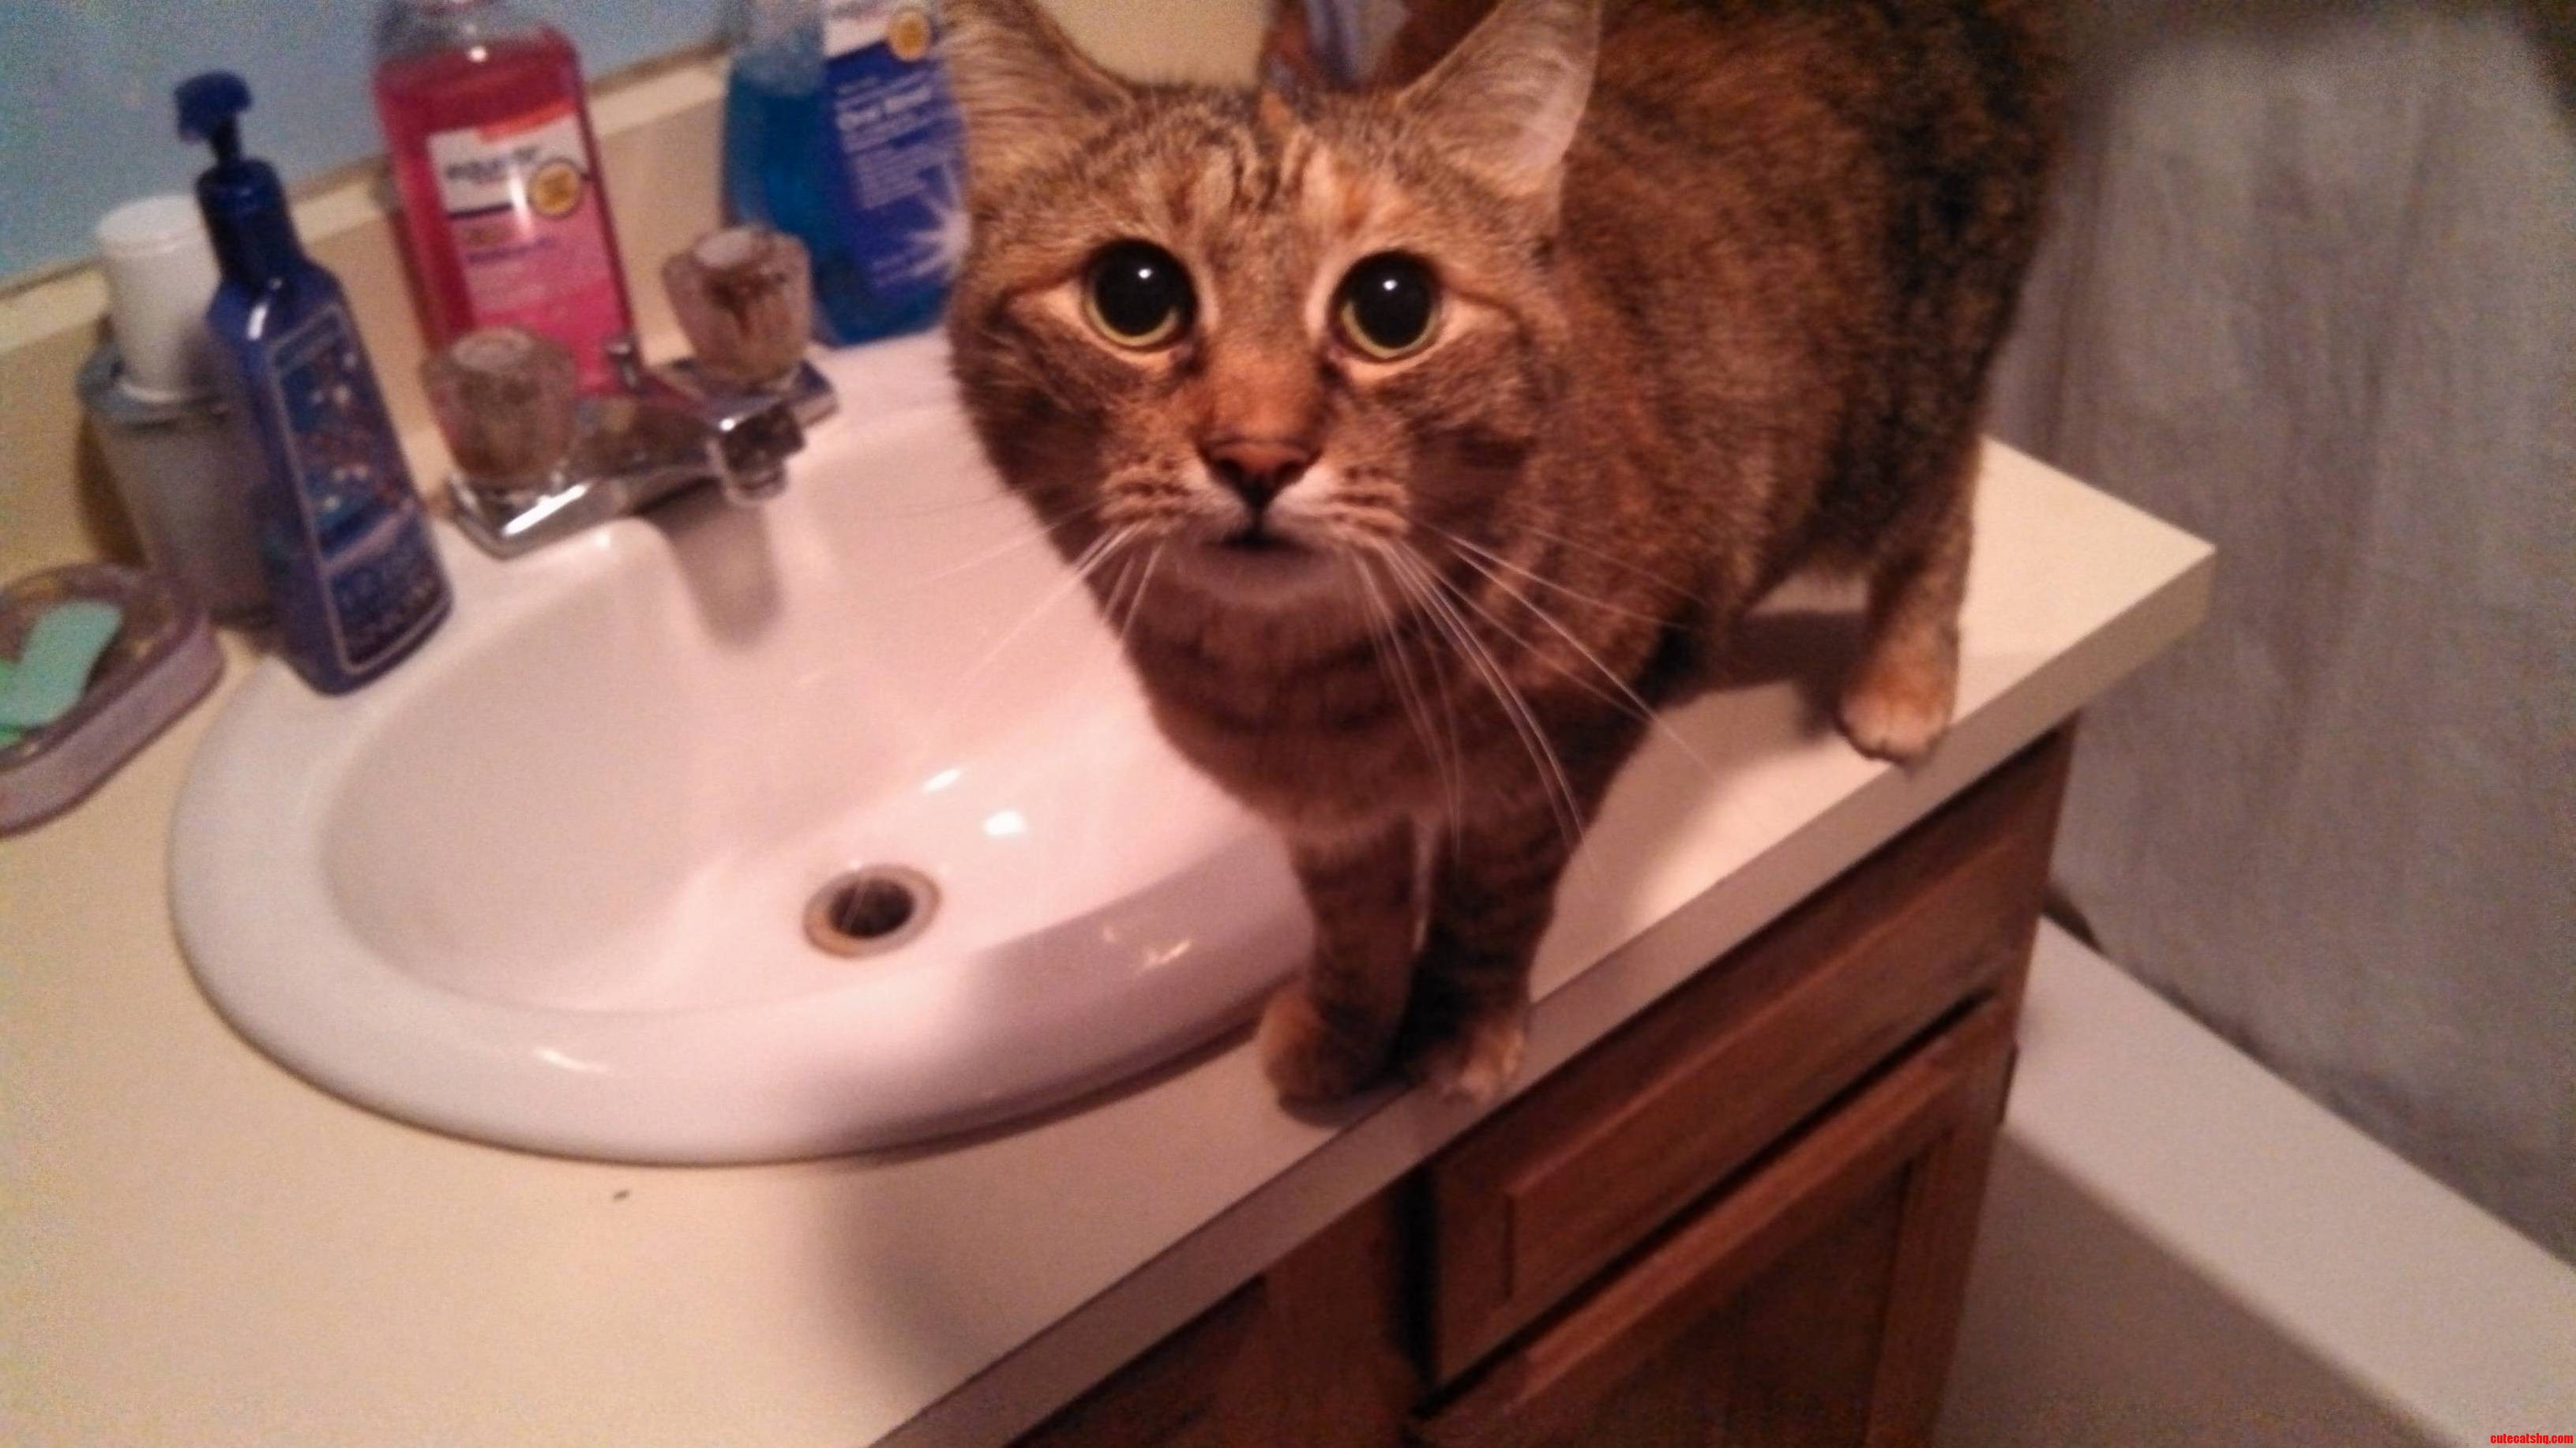 Without Fail My Cat Patton Comes To The Sink For Water Everytime I Go To The Bathroom….